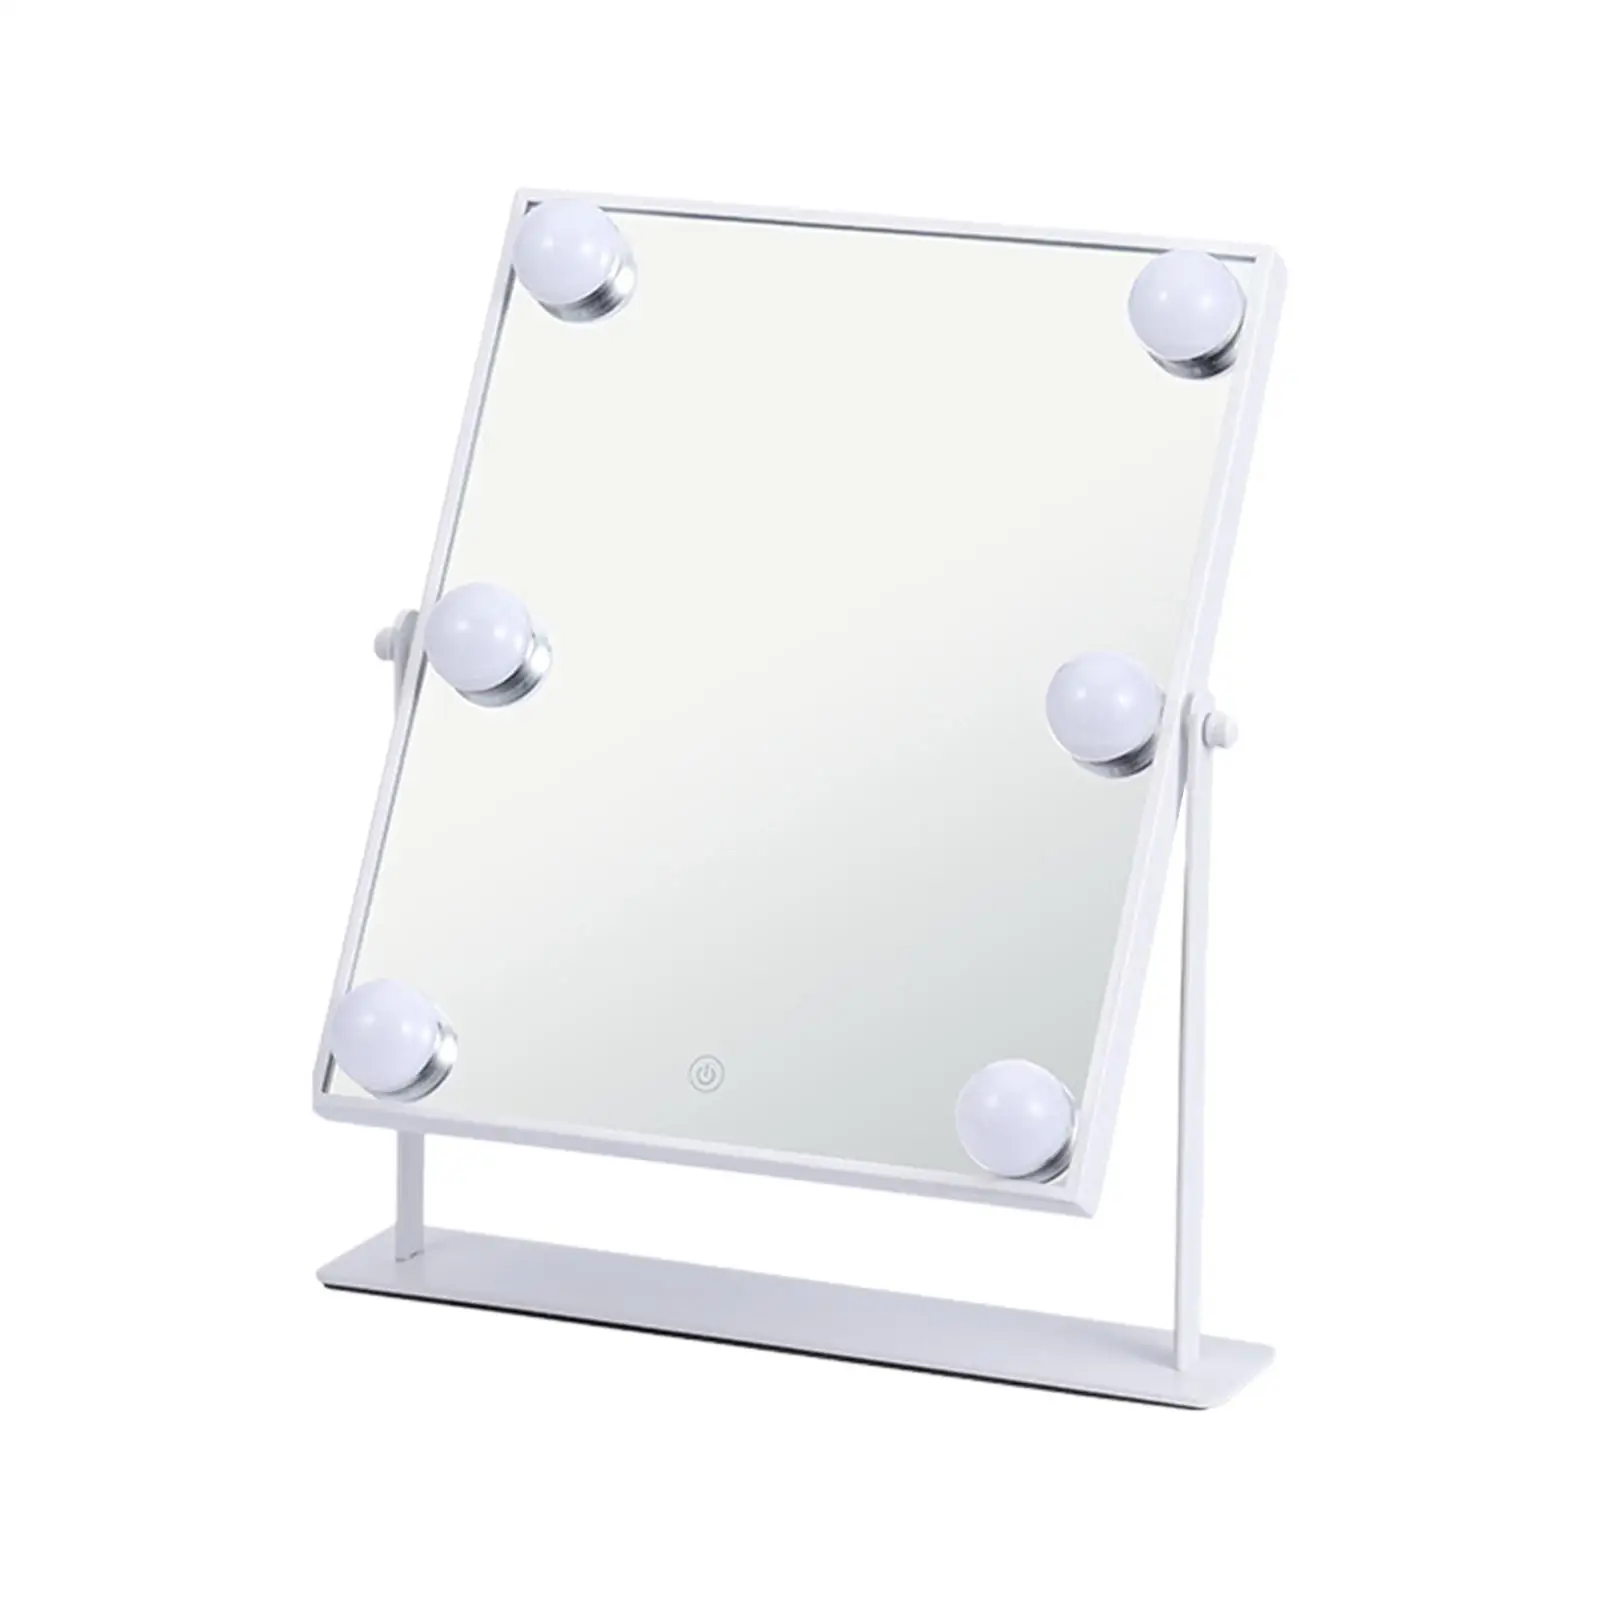 360 Degree Makeup Mirror with Bulbs Decoration Cosmetic with USB Cable Supply for Dressing Table Tabletop Bathroom